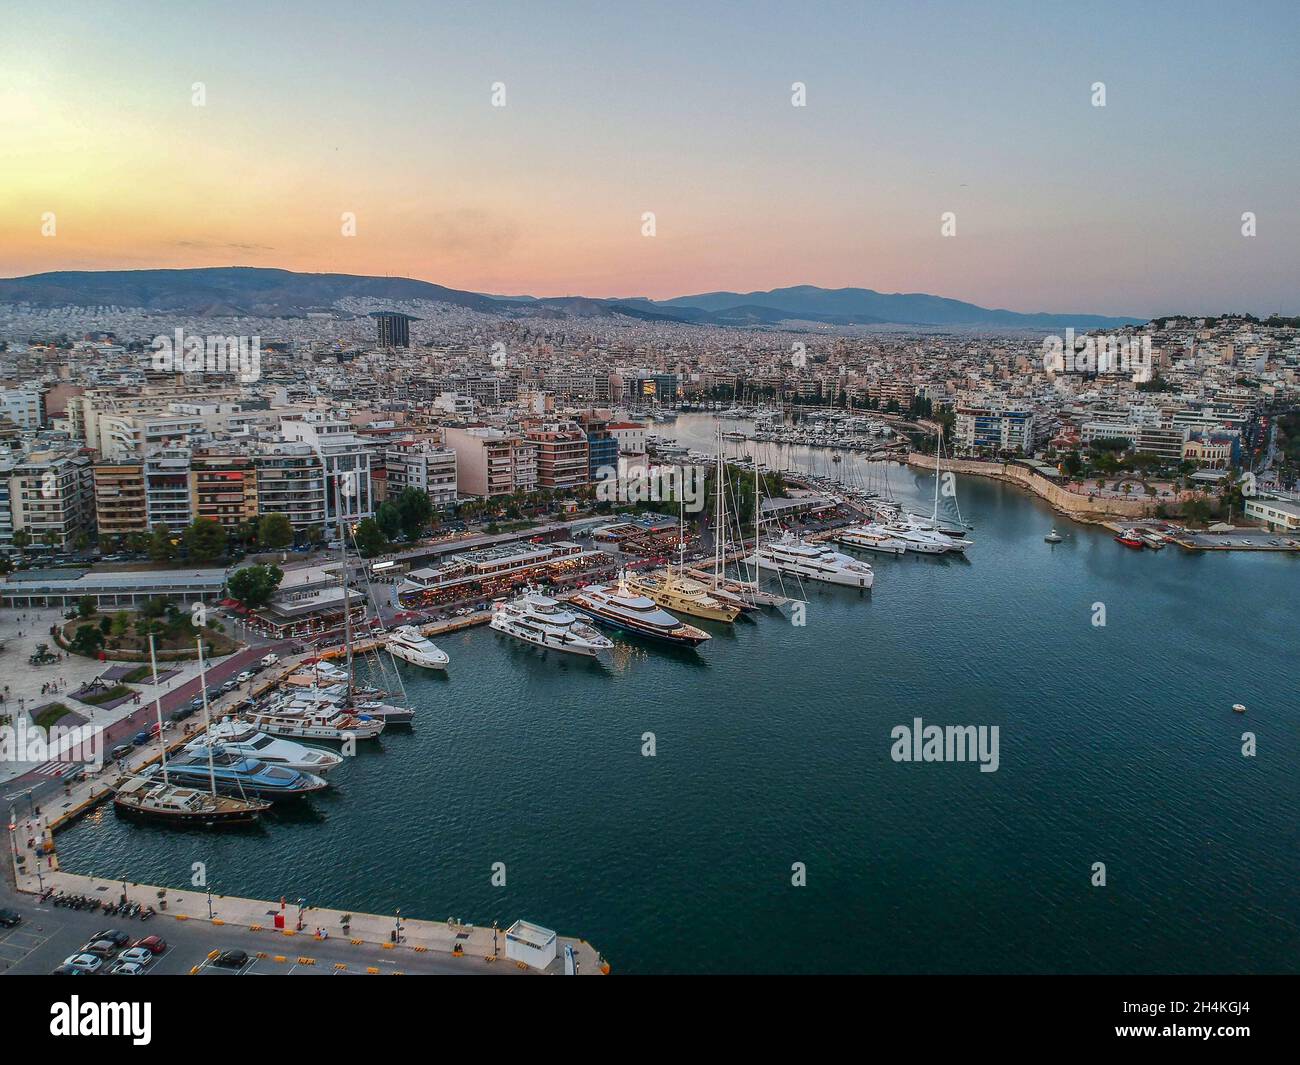 Aerial panorama view over the famous Marina Zeas, Peiraeus at sunset. Marina Zeas is a small crowded circular port with boats docked in Peiraeus city Stock Photo